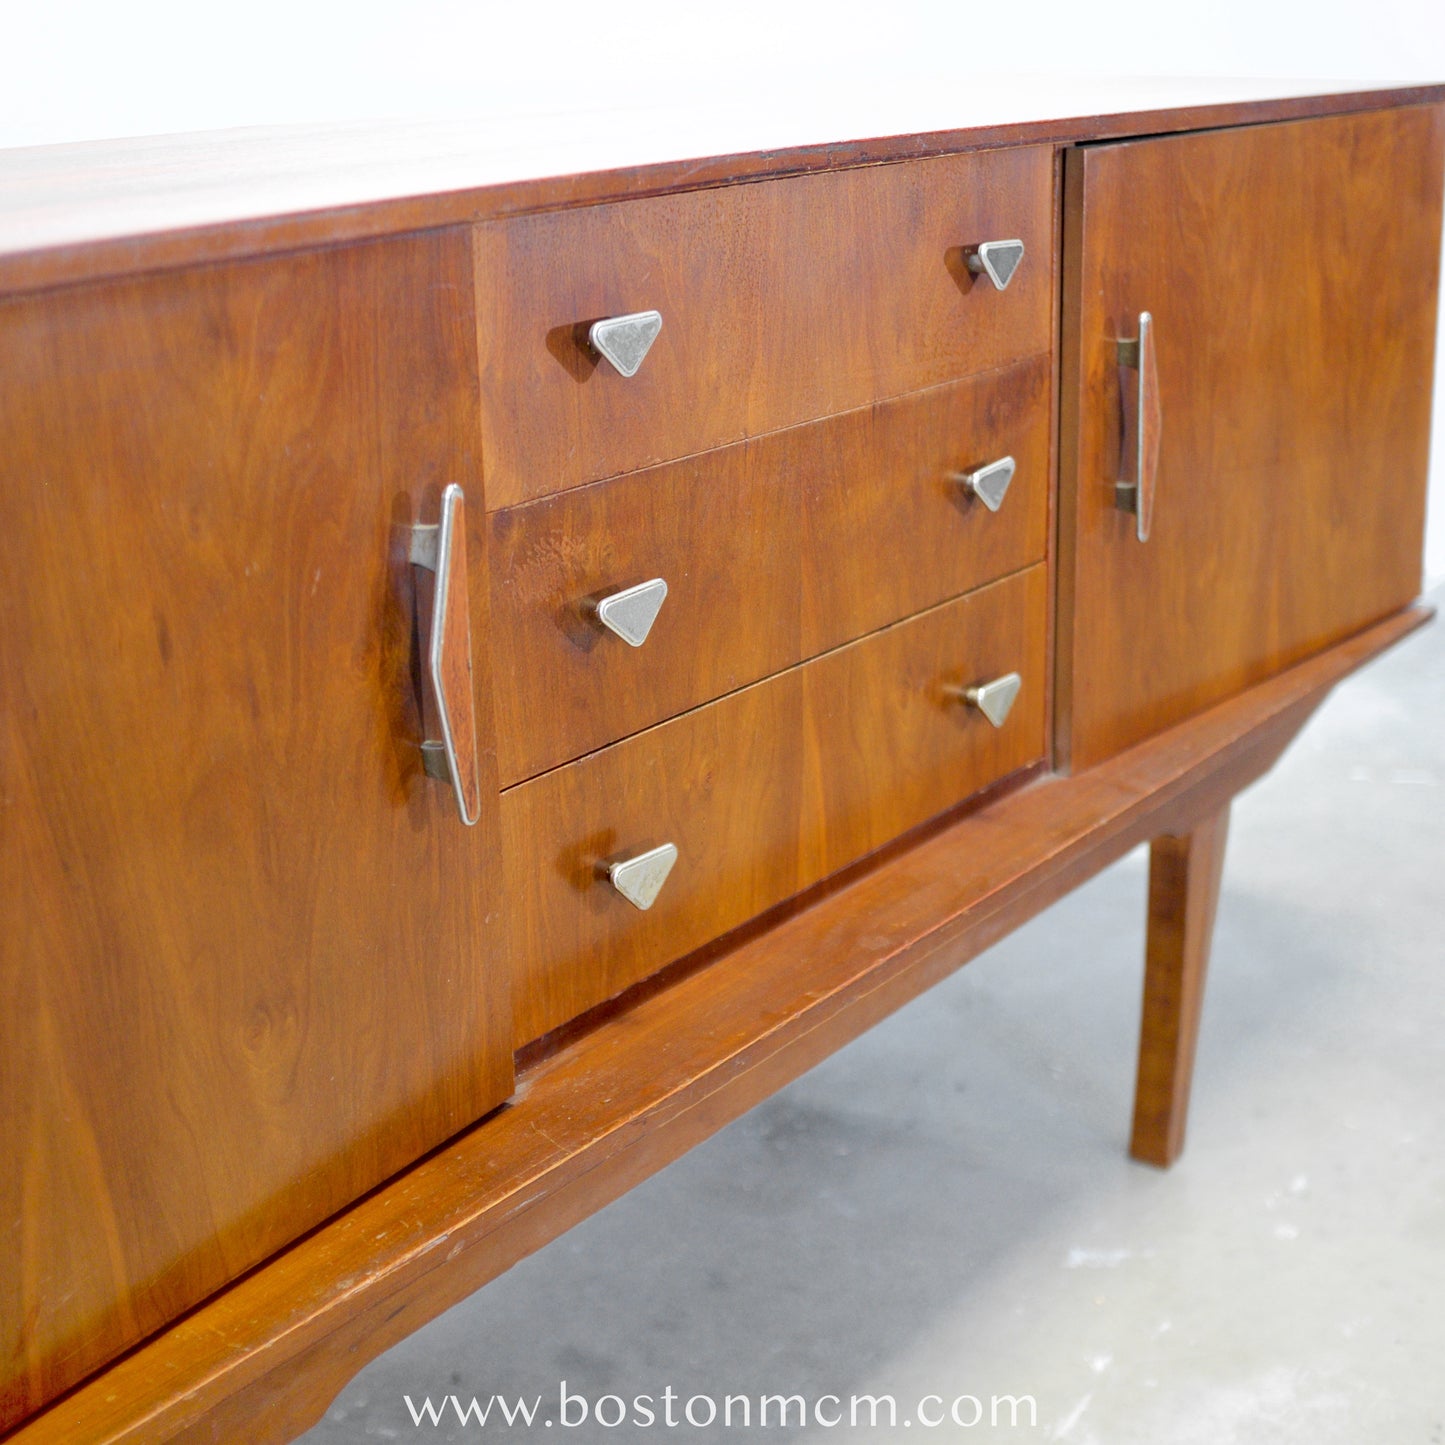 British Small Credenza with Metal Handles and Curved Front